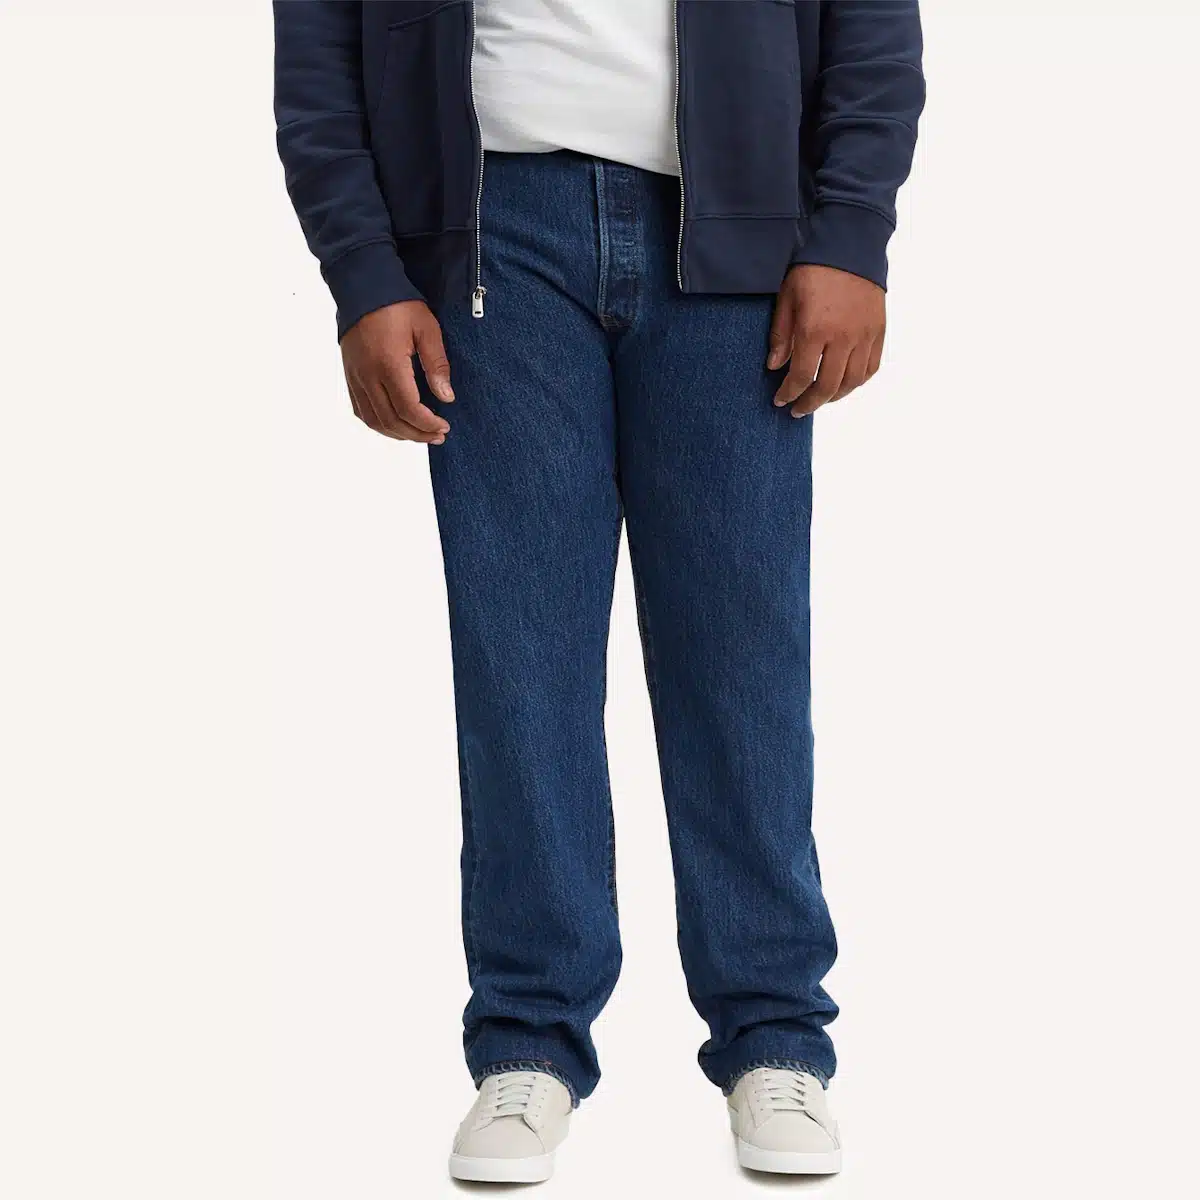 Levis 501 Jeans Big and Tall